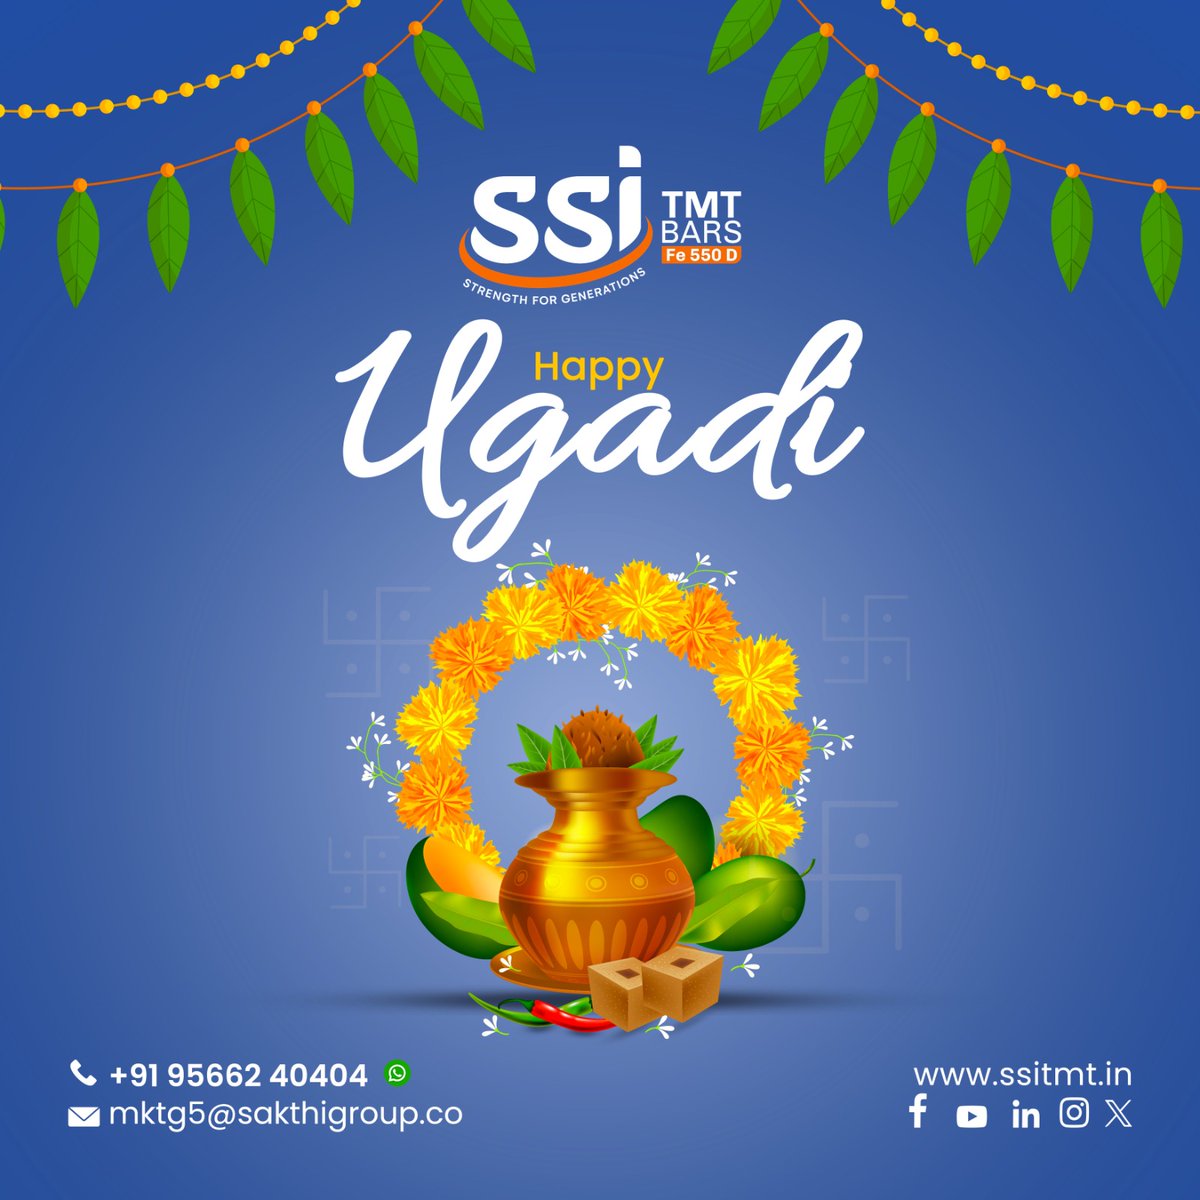 Wishing you and your loved ones a joyous Ugadi filled with new beginnings, prosperity, and blessings! May this auspicious occasion bring you abundant happiness, success, and good health throughout the year. Happy Ugadi.

#ConstructingTraditions #UgadiUnity #CelebratingProgress